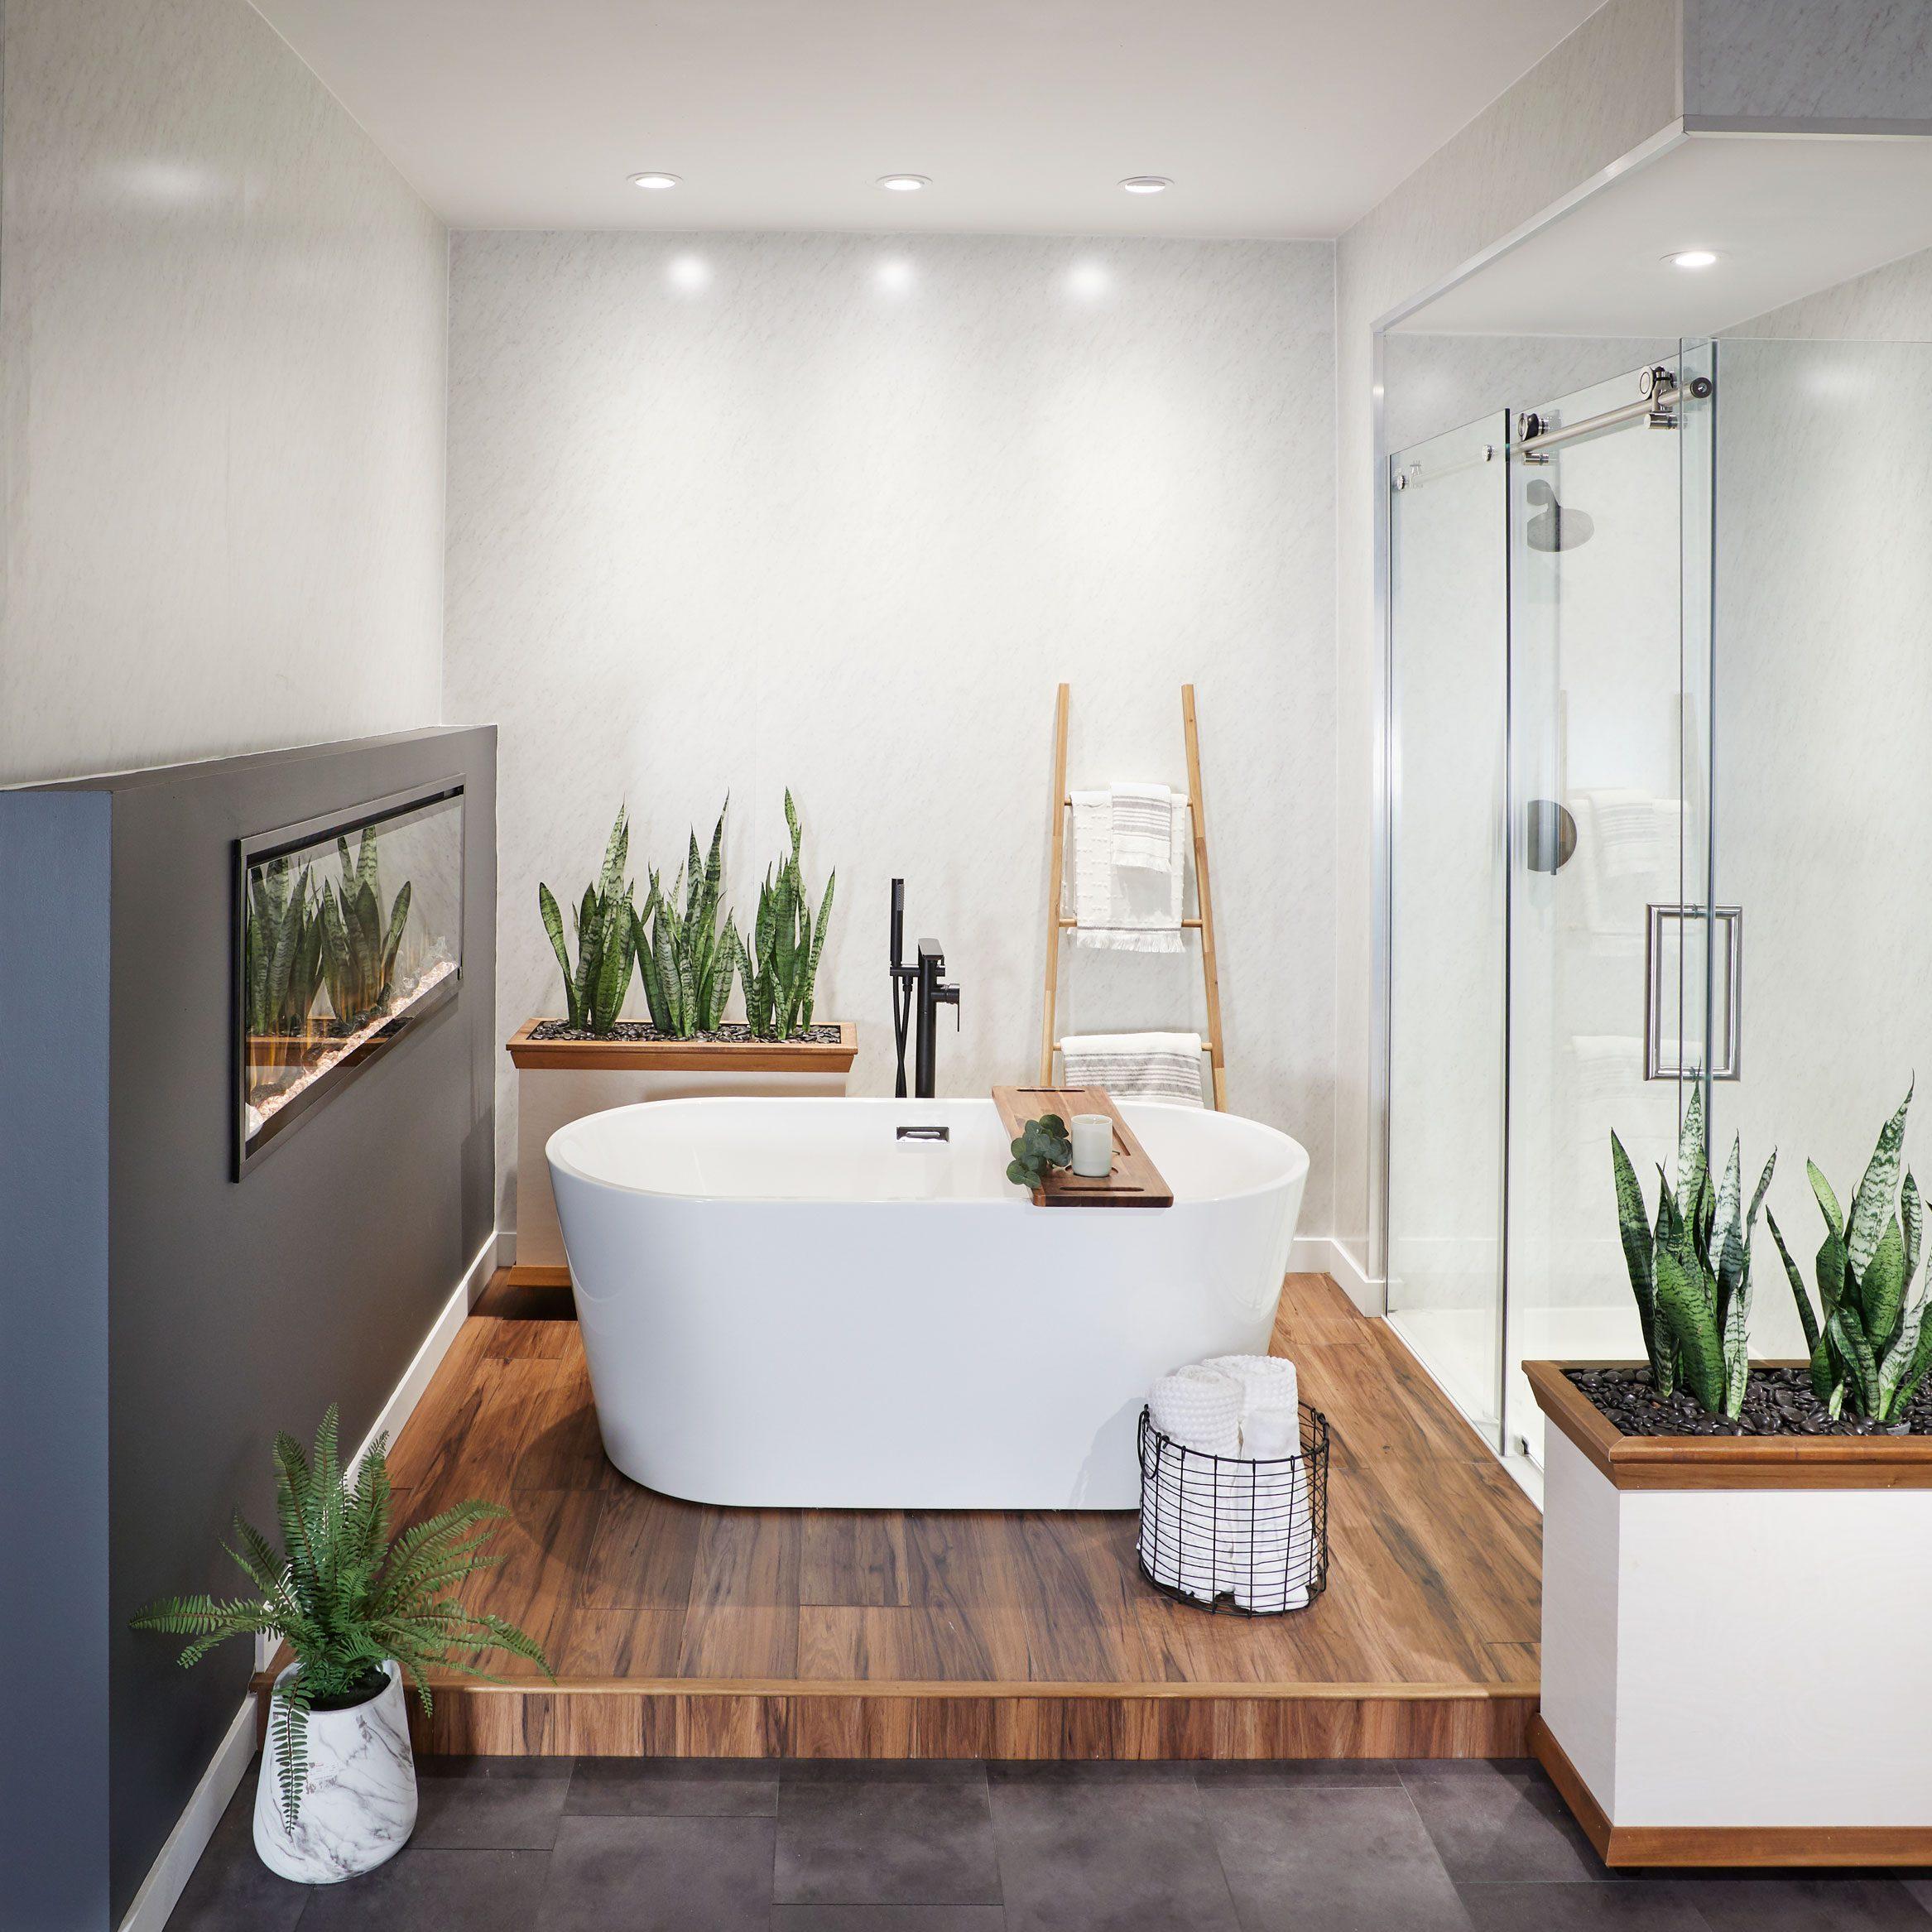 How To Create The Perfect Spa Style Bathroom at Home